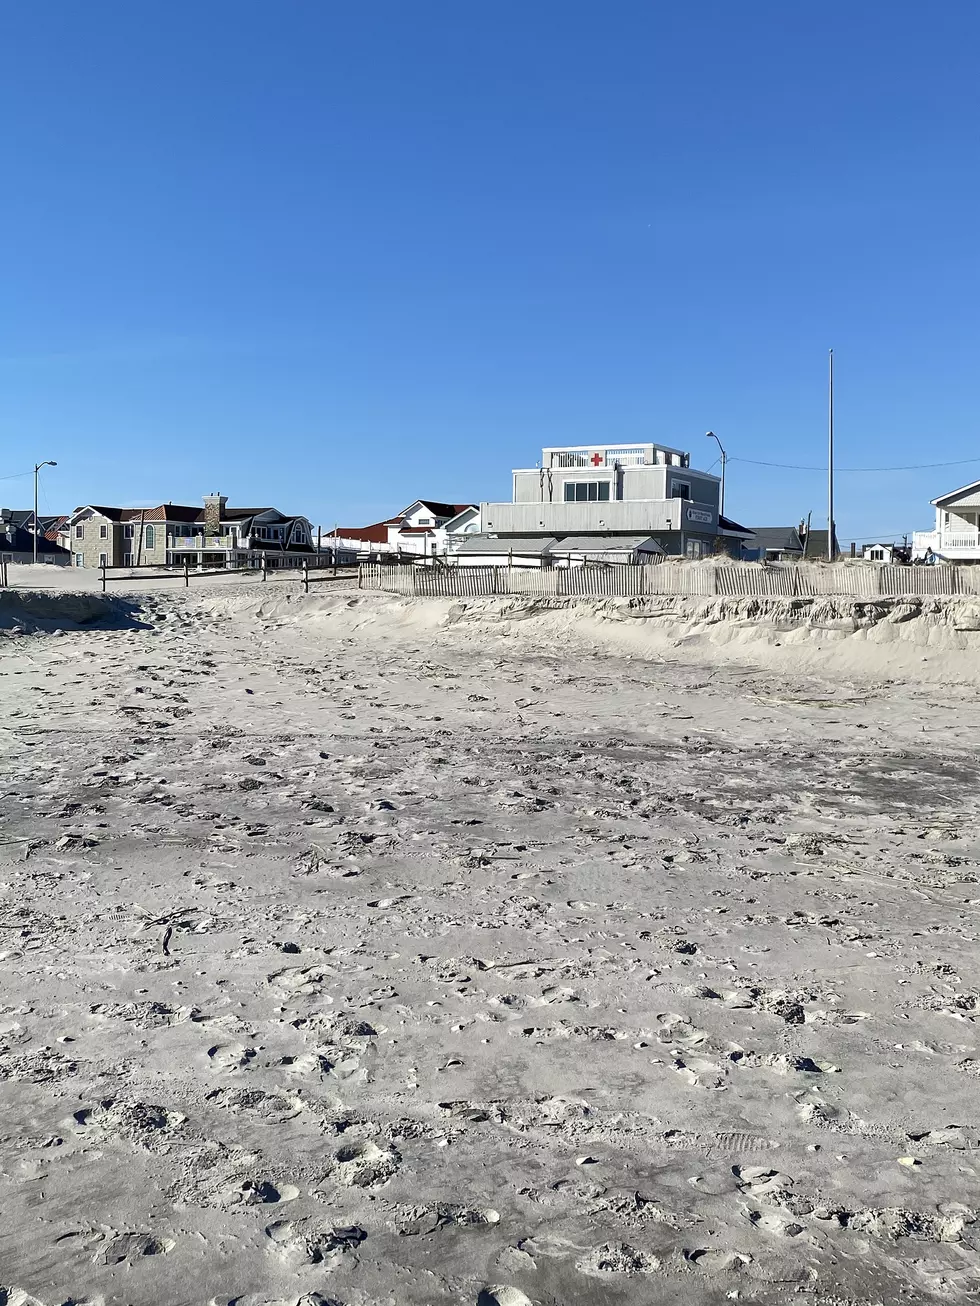 HGTV Features NJ Couple Searching for a Jersey Shore Home